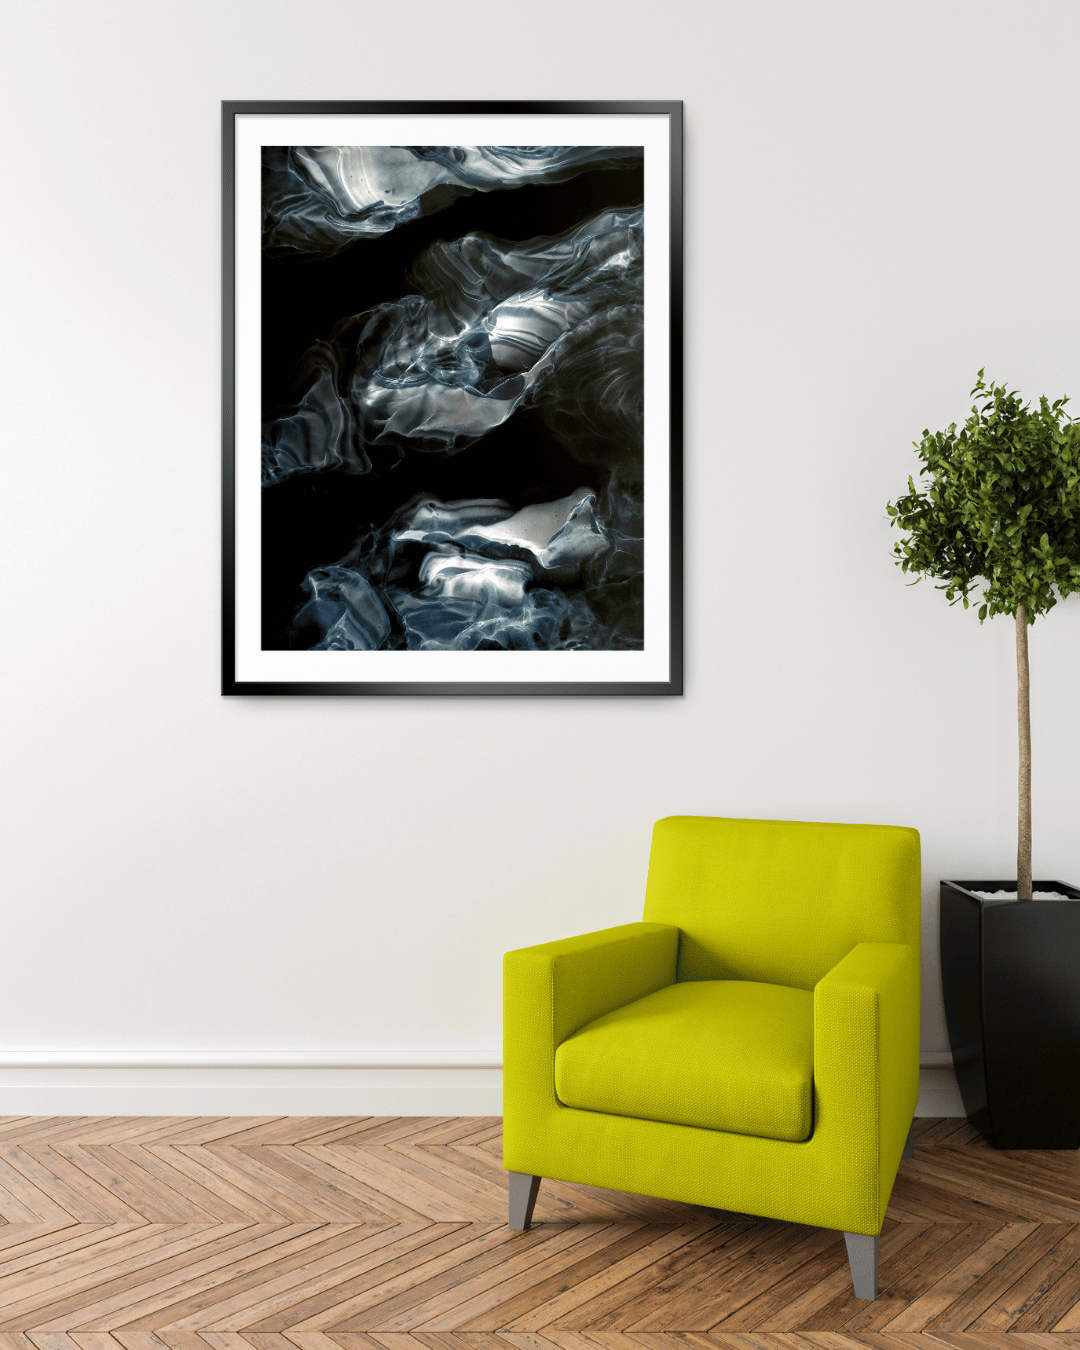 Black and White Abstract Wall Art Print - "Abyss"